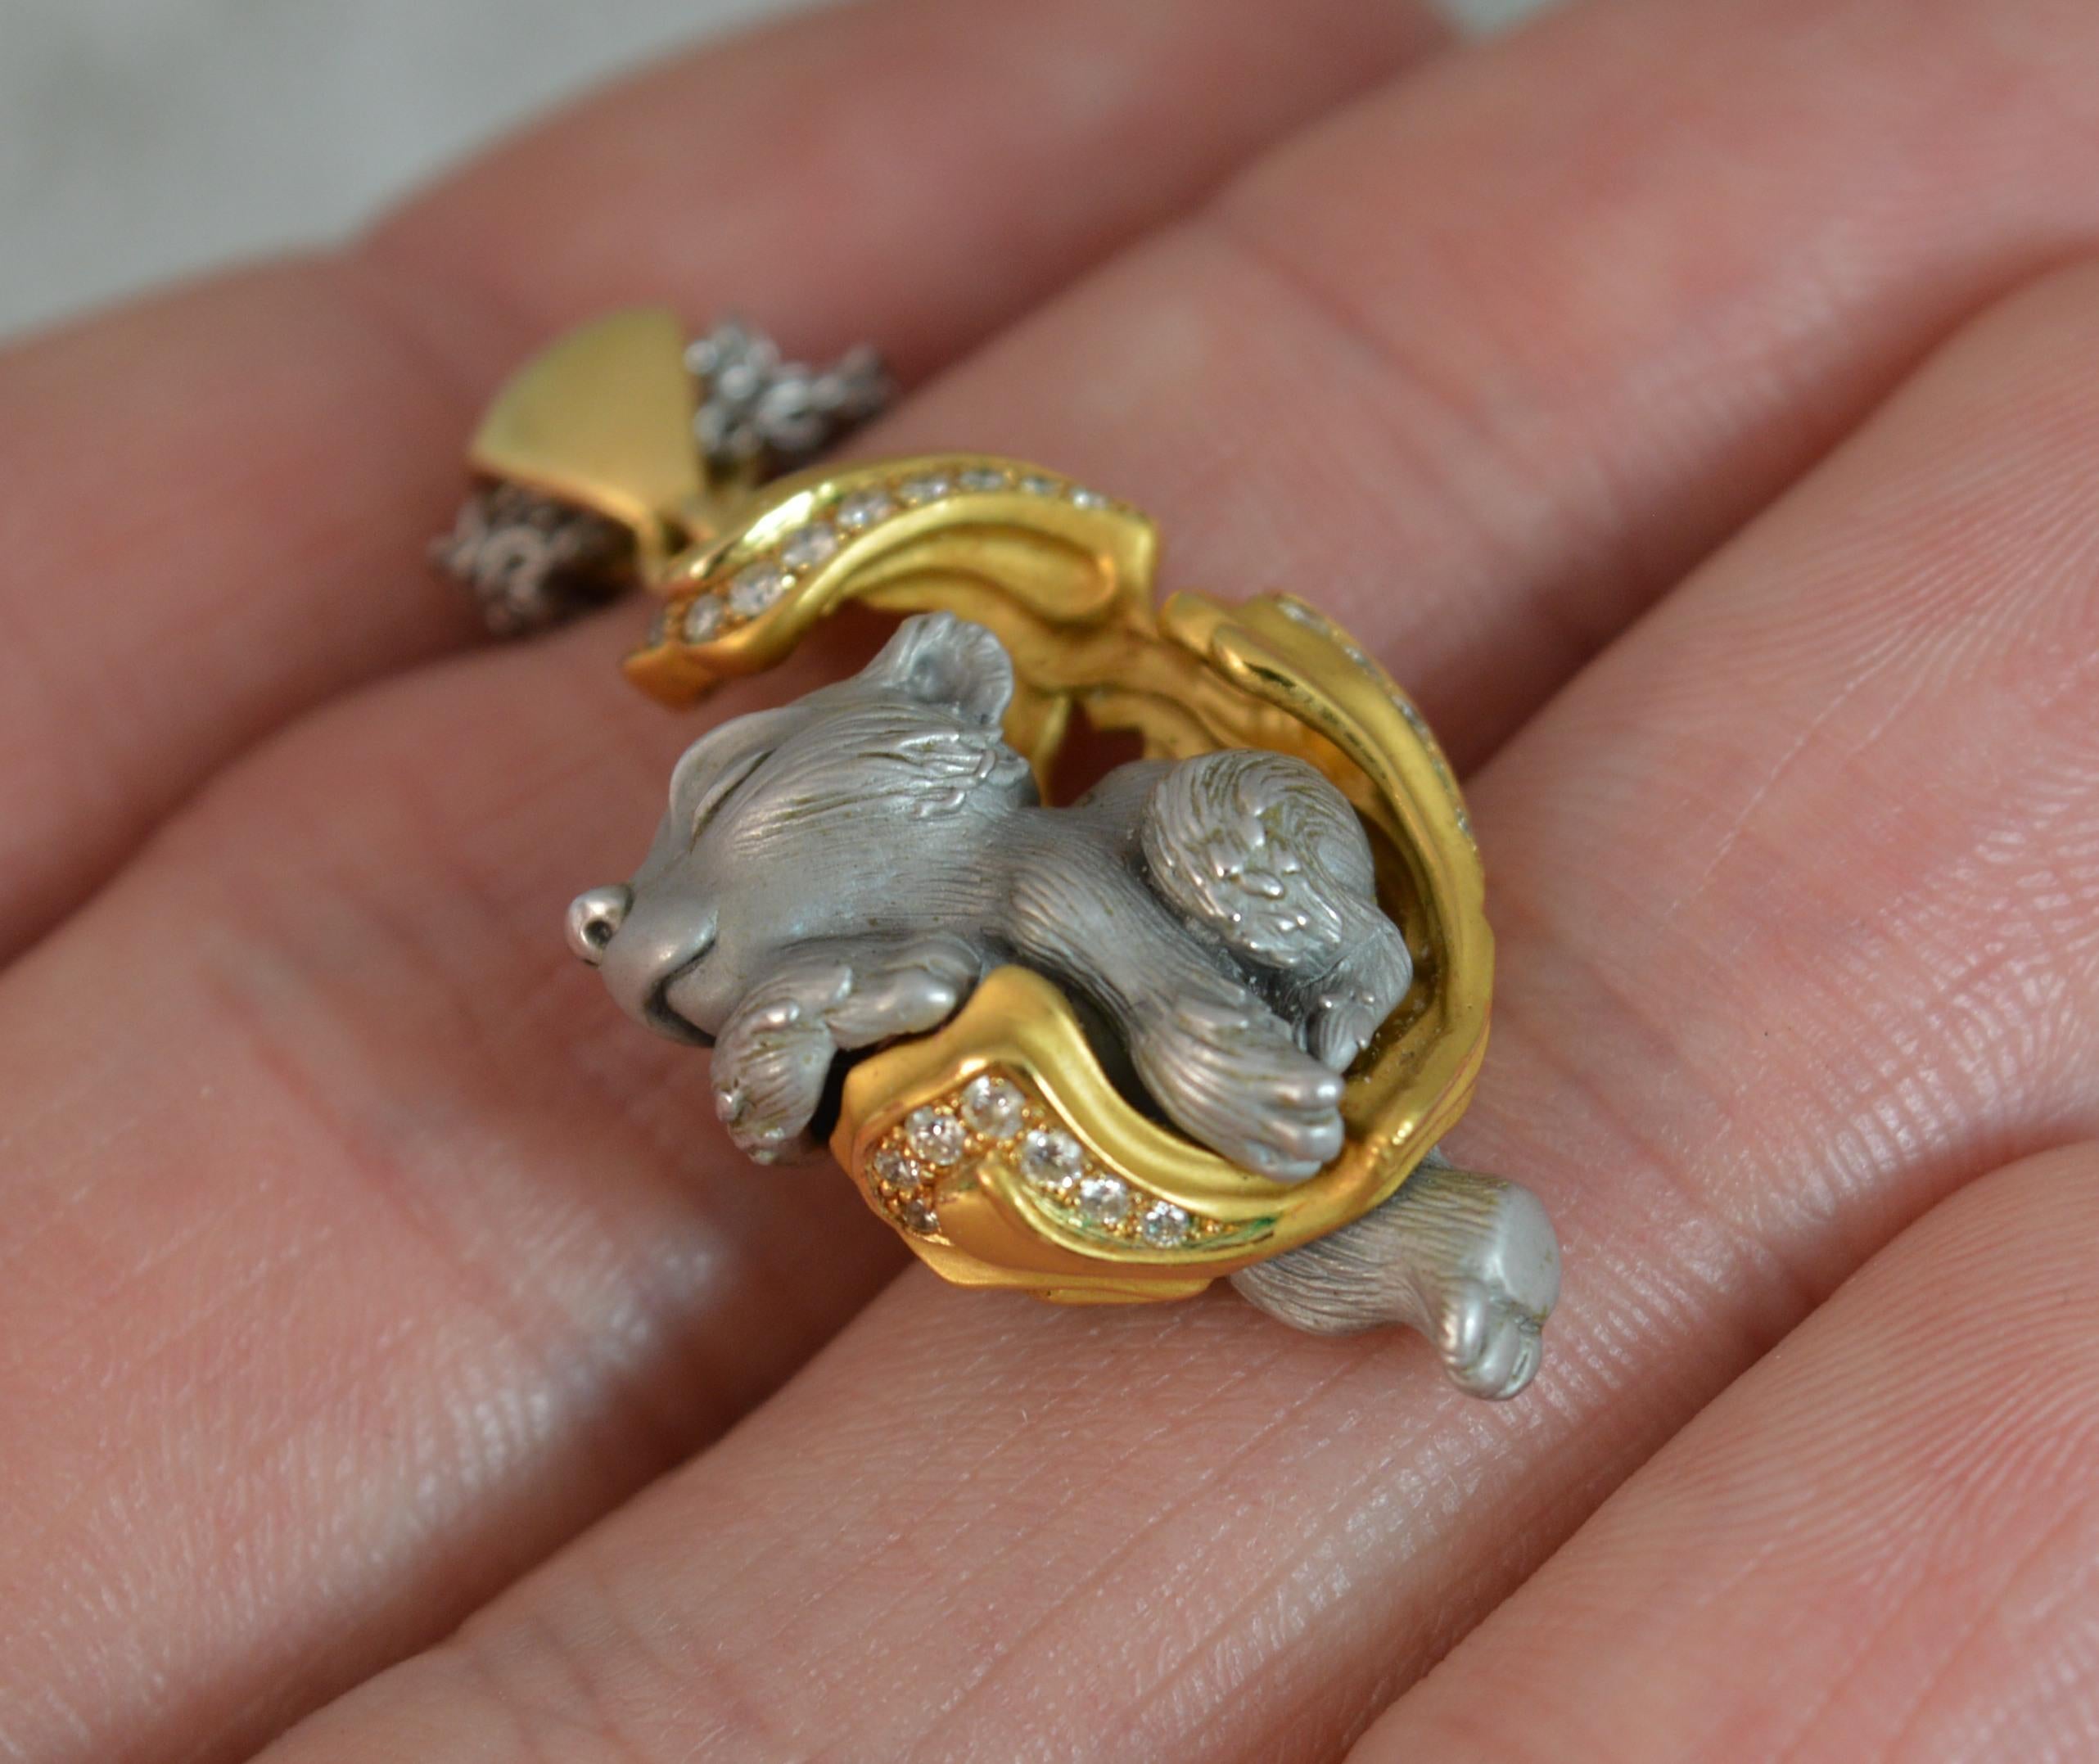 A stunning quality Magerit Dreams designer pendant and chain.

The pendant is exquisitely made in 18 carat yellow and white gold with both a shiny and matte finish. Formed depicting a sleeping bear with round brilliant cut diamonds to the yellow